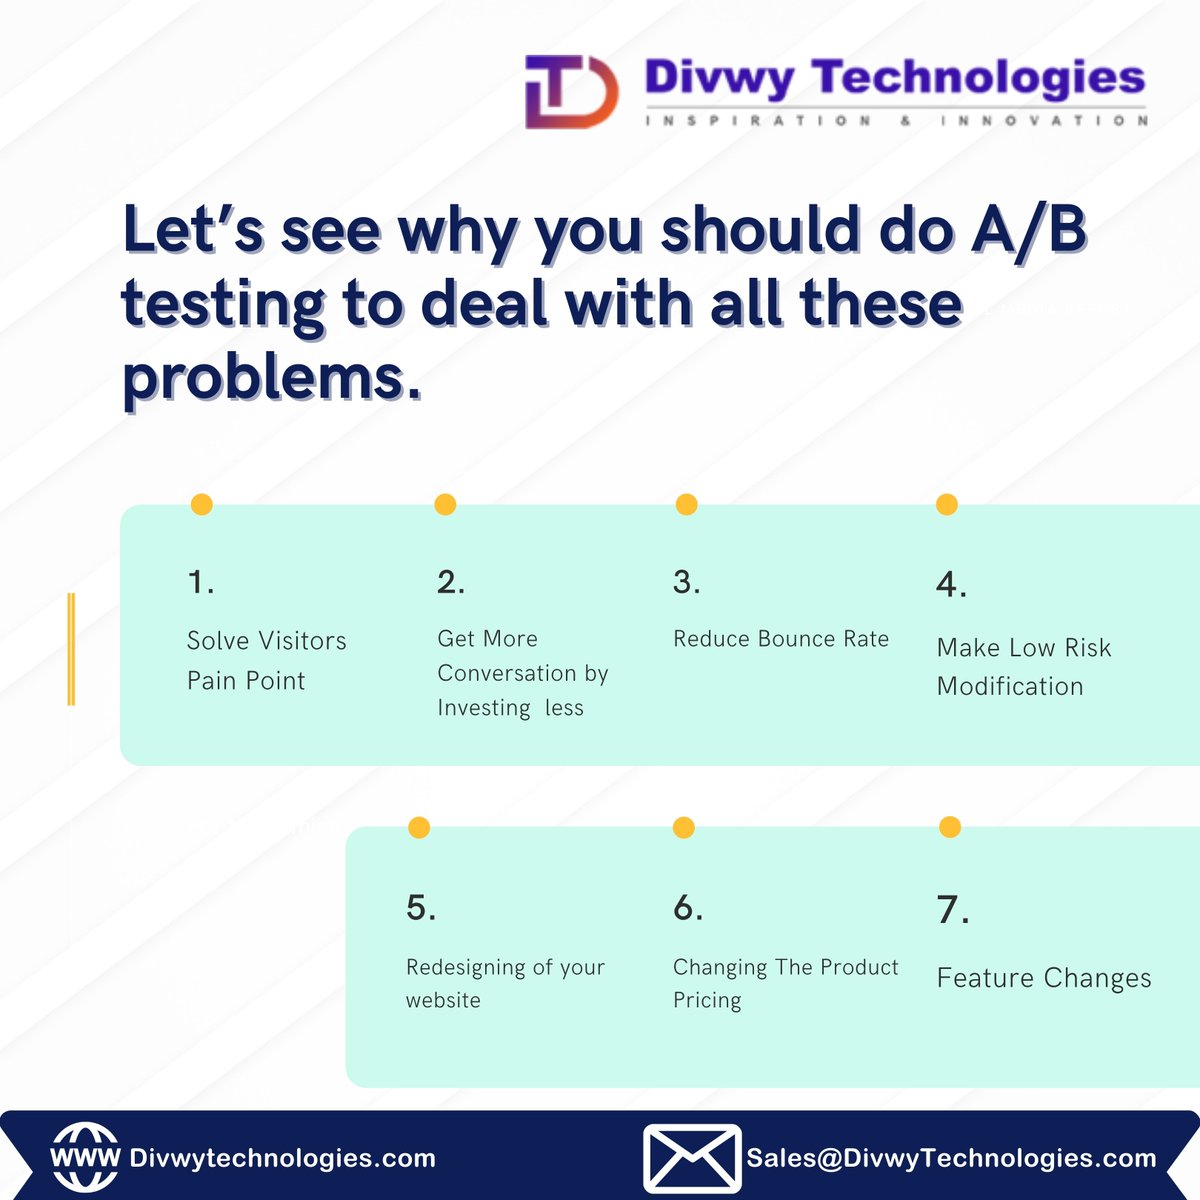 Let’s see why you should do A/B testing to deal with all these problems.

#Divwytechnologies #marketingdigital #business #content #digital #marketing #digitalmarketing #seotips #socialmediamarketing #marketingstrategy #bestdigitalmarketingcompany #SEOcompany #stayconnected